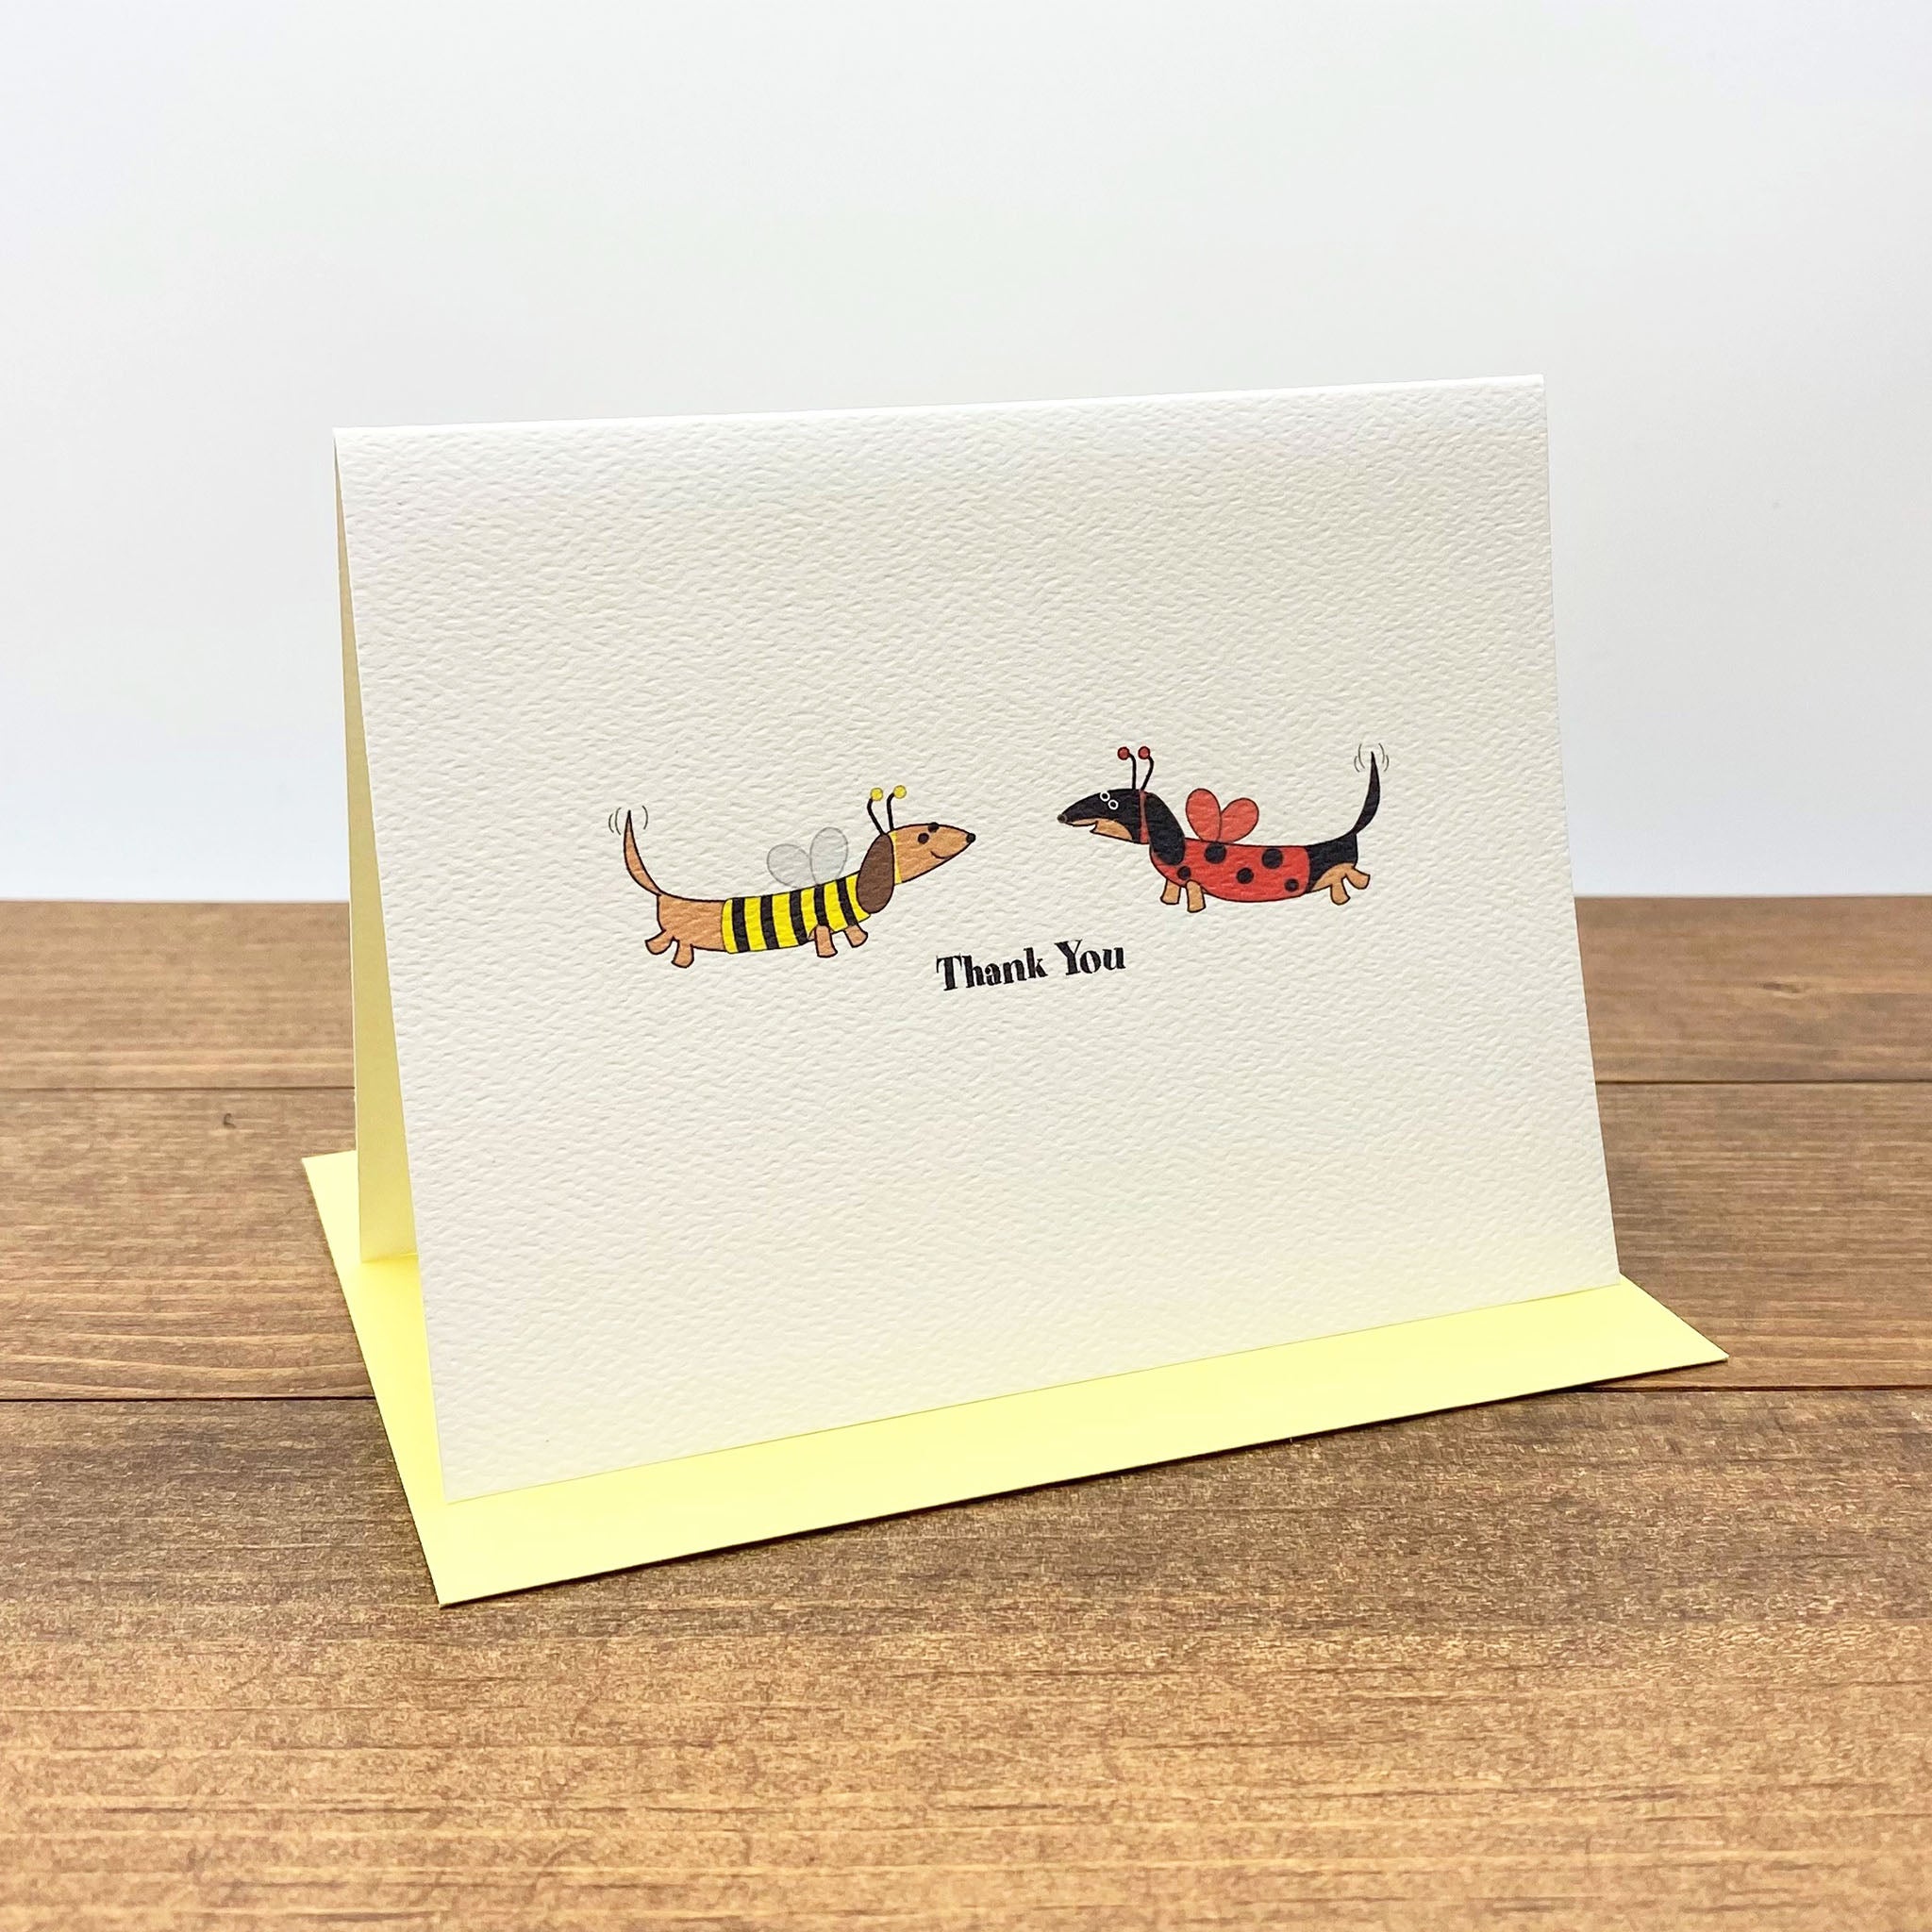 Dachshund ladybug and bee thank you note cards.